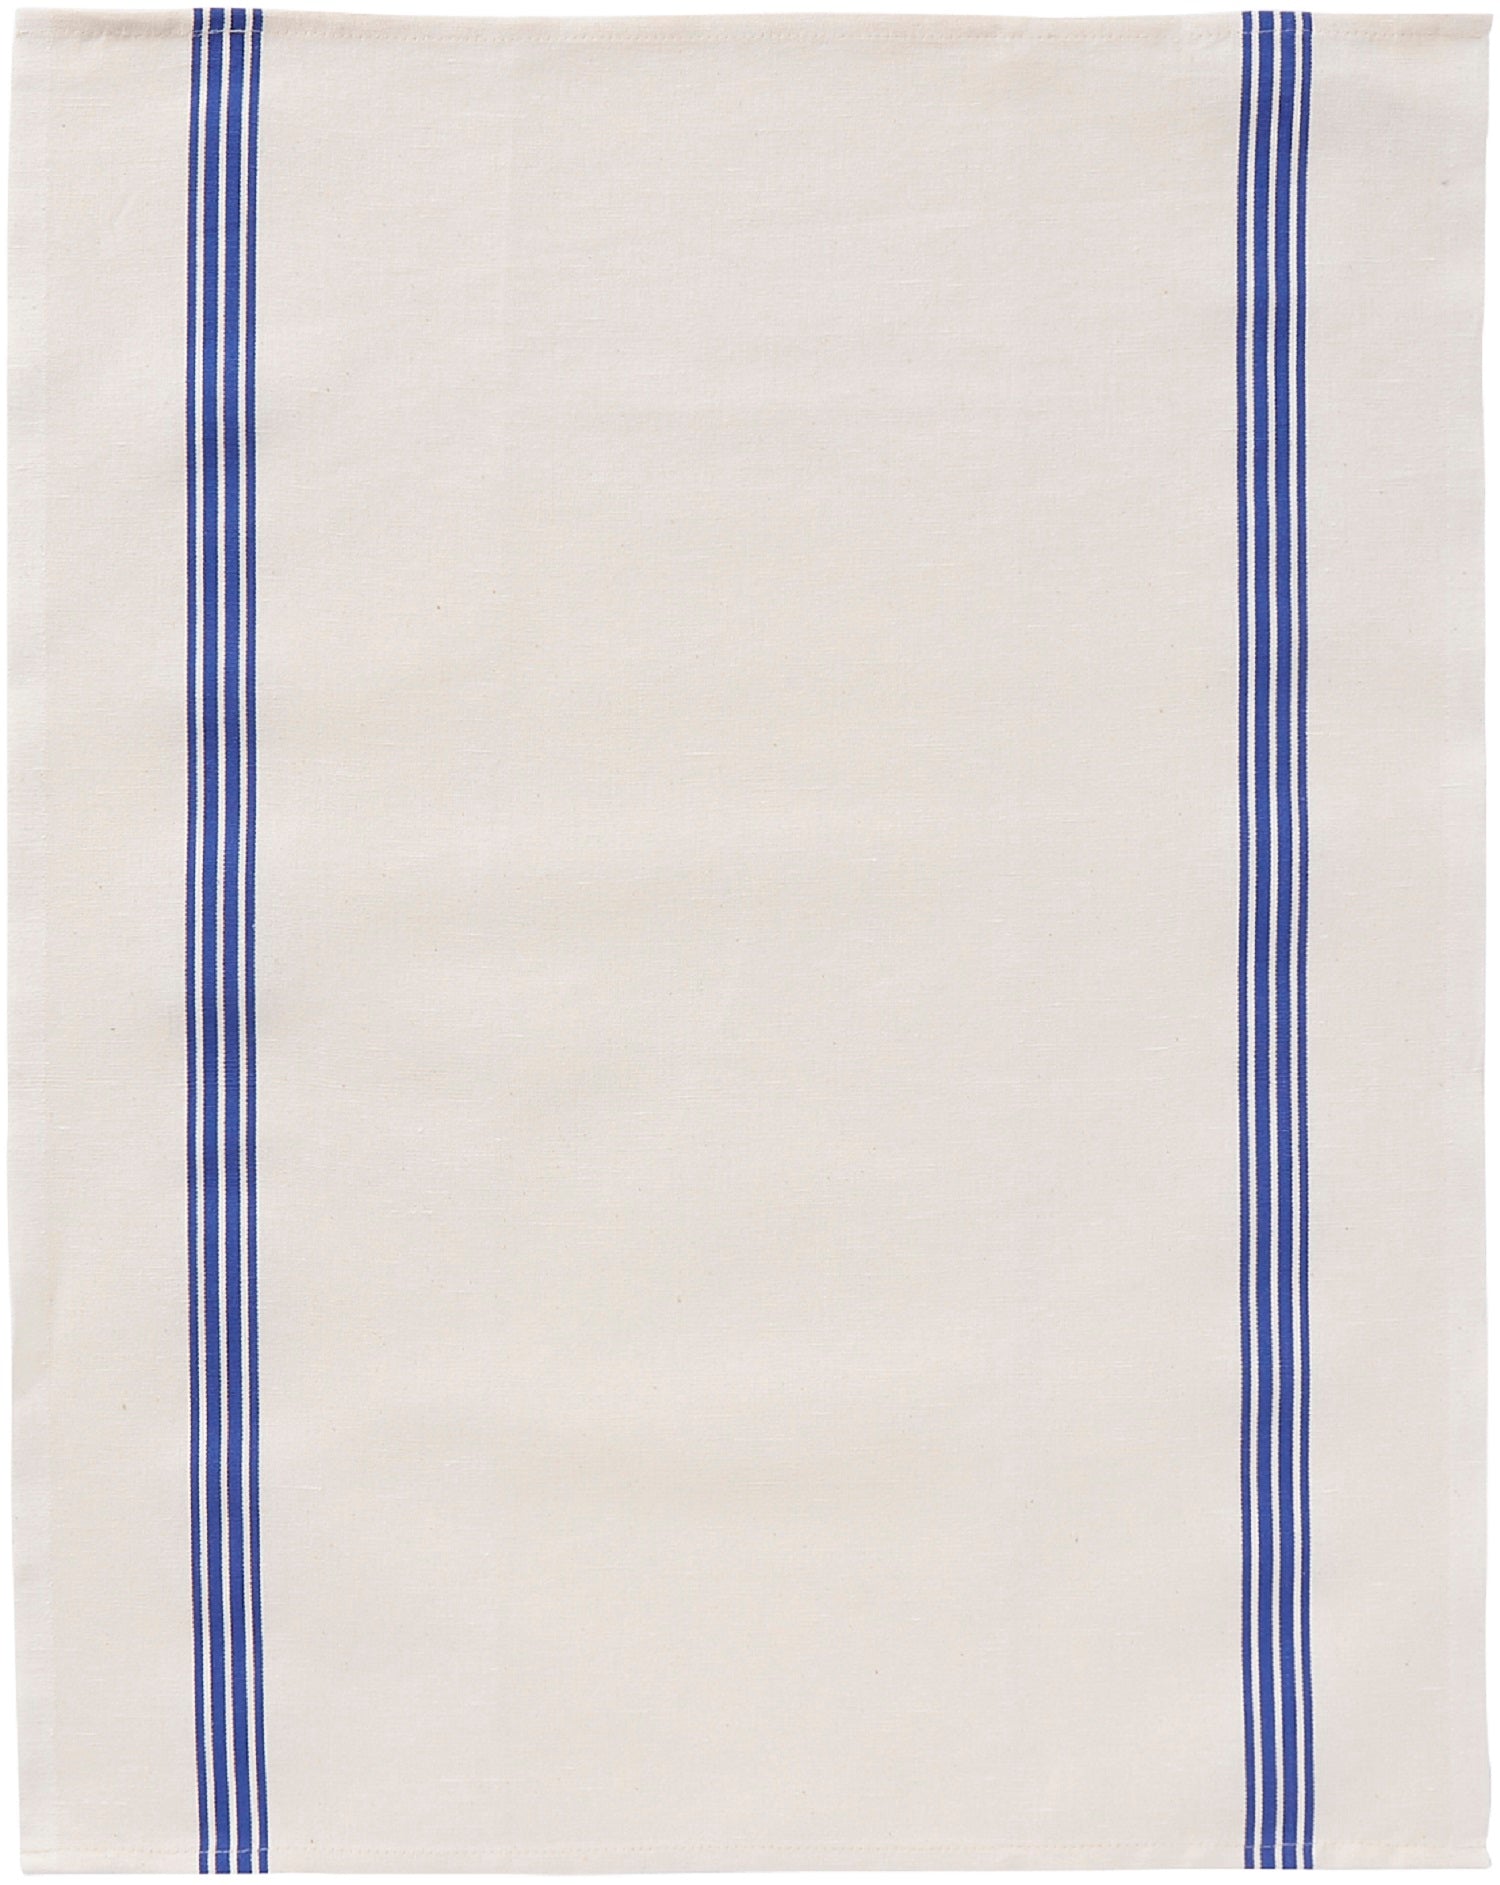 Charvet Editions "Piano" (Blue), Washed, woven linen union tea towel. France.